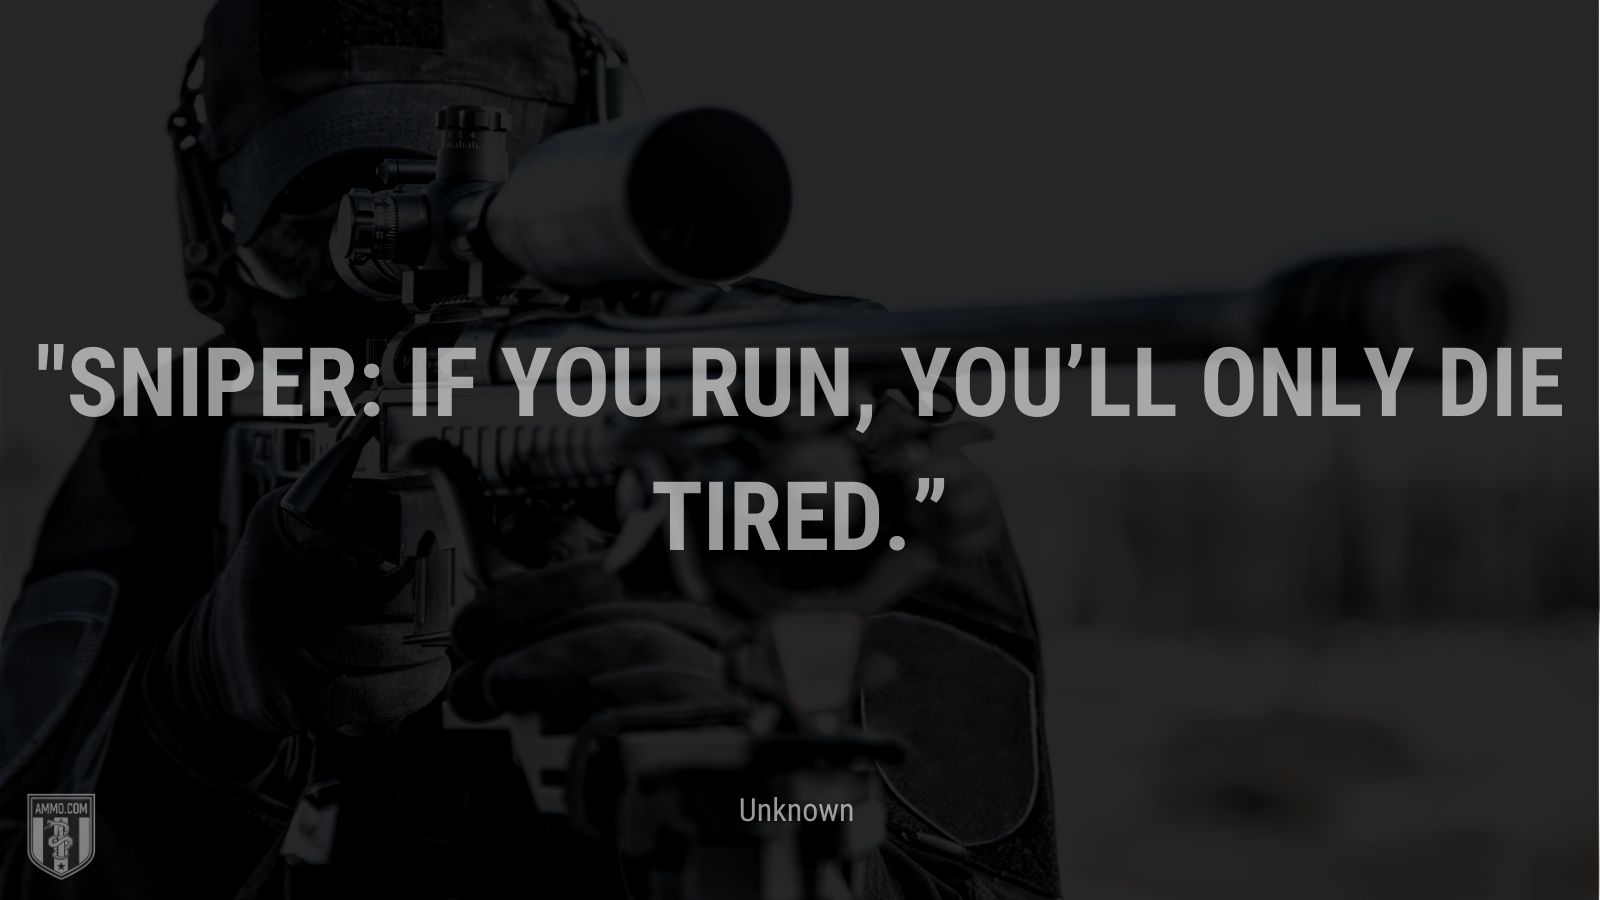 “Sniper: If you run, you’ll only die tired.” - Unknown